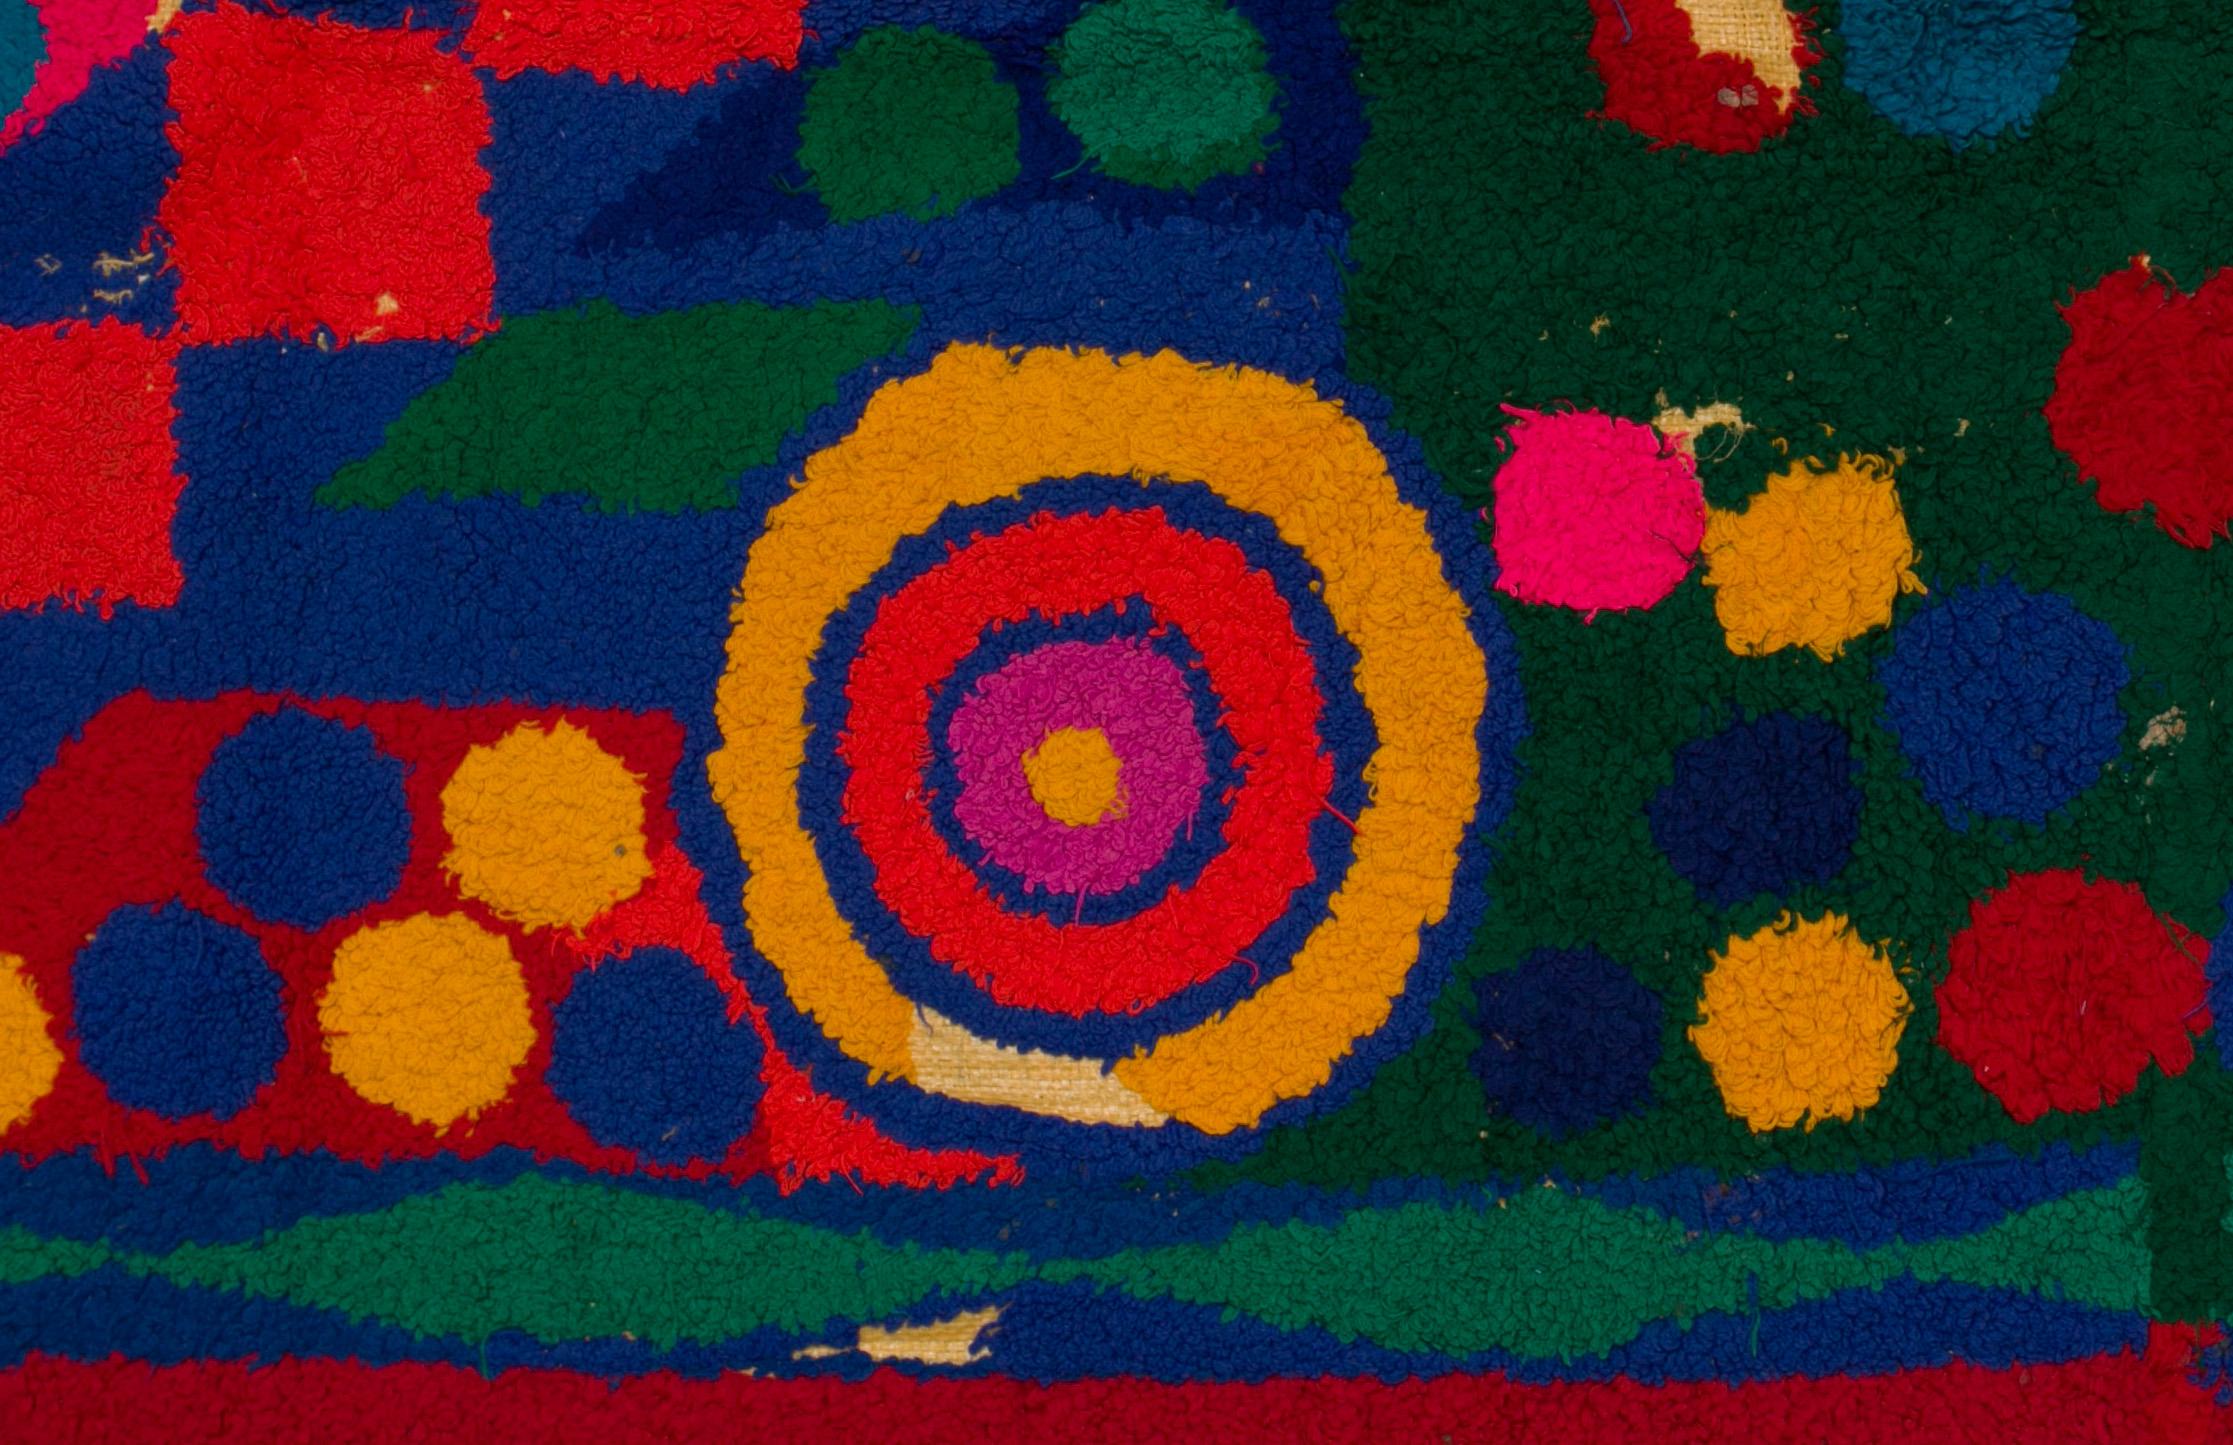 Extra large and unique, this tapestry was made by Berber women from the Atlas Mountains.
Made from woollen ends and other threads, embroidered on wasted plastic bags of cereals, this unique and vintage work is the demonstration of the secret